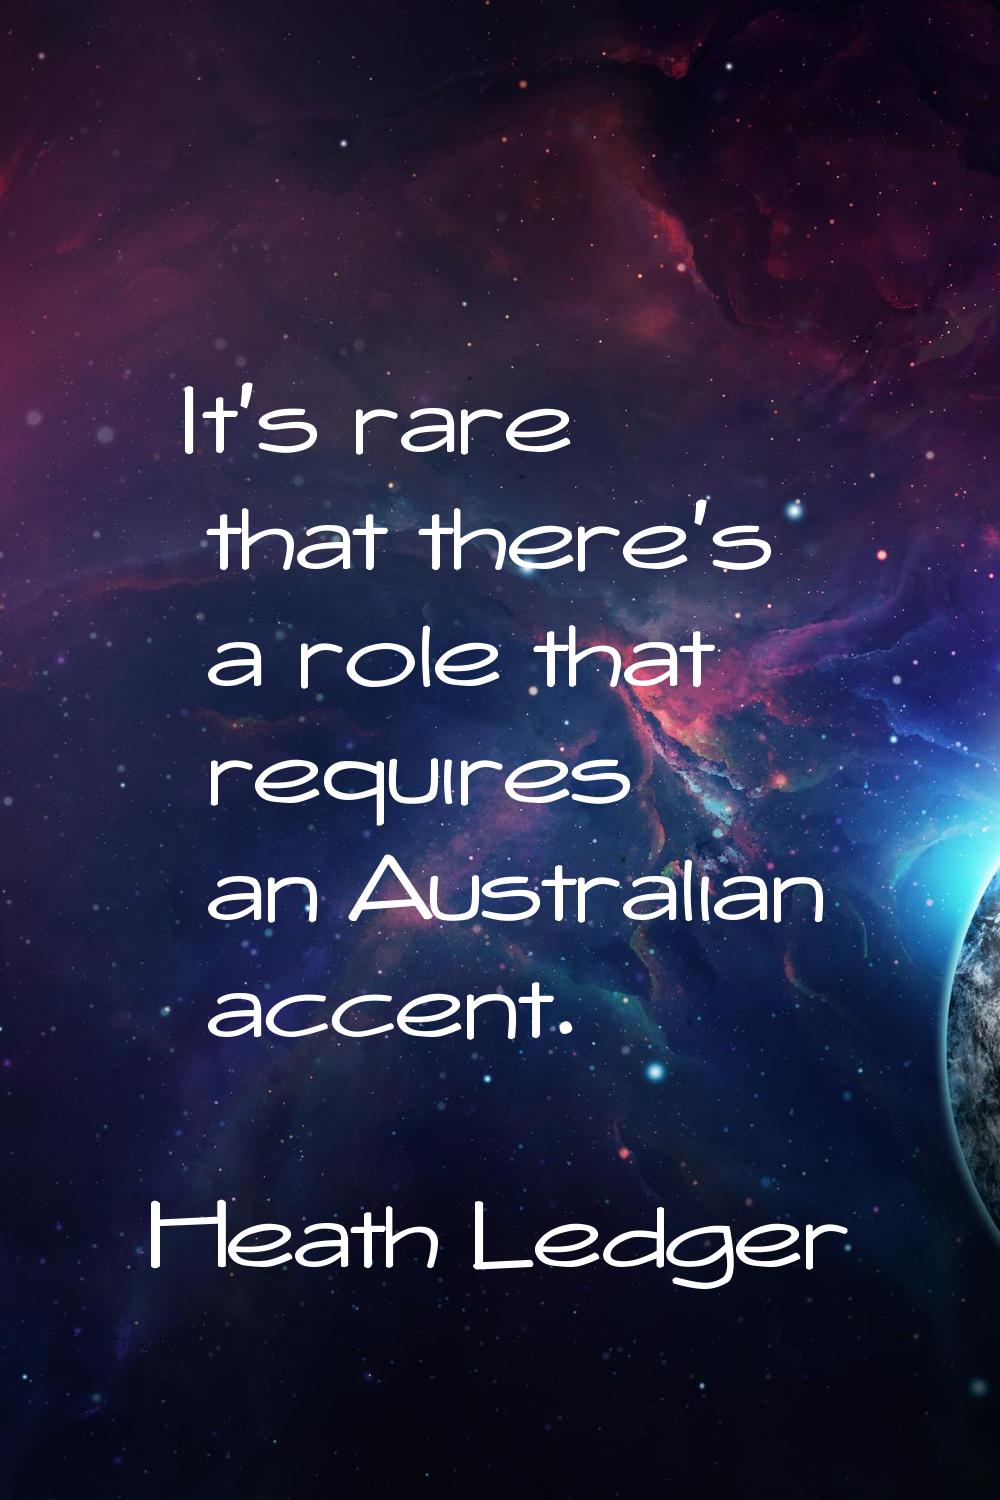 It's rare that there's a role that requires an Australian accent.